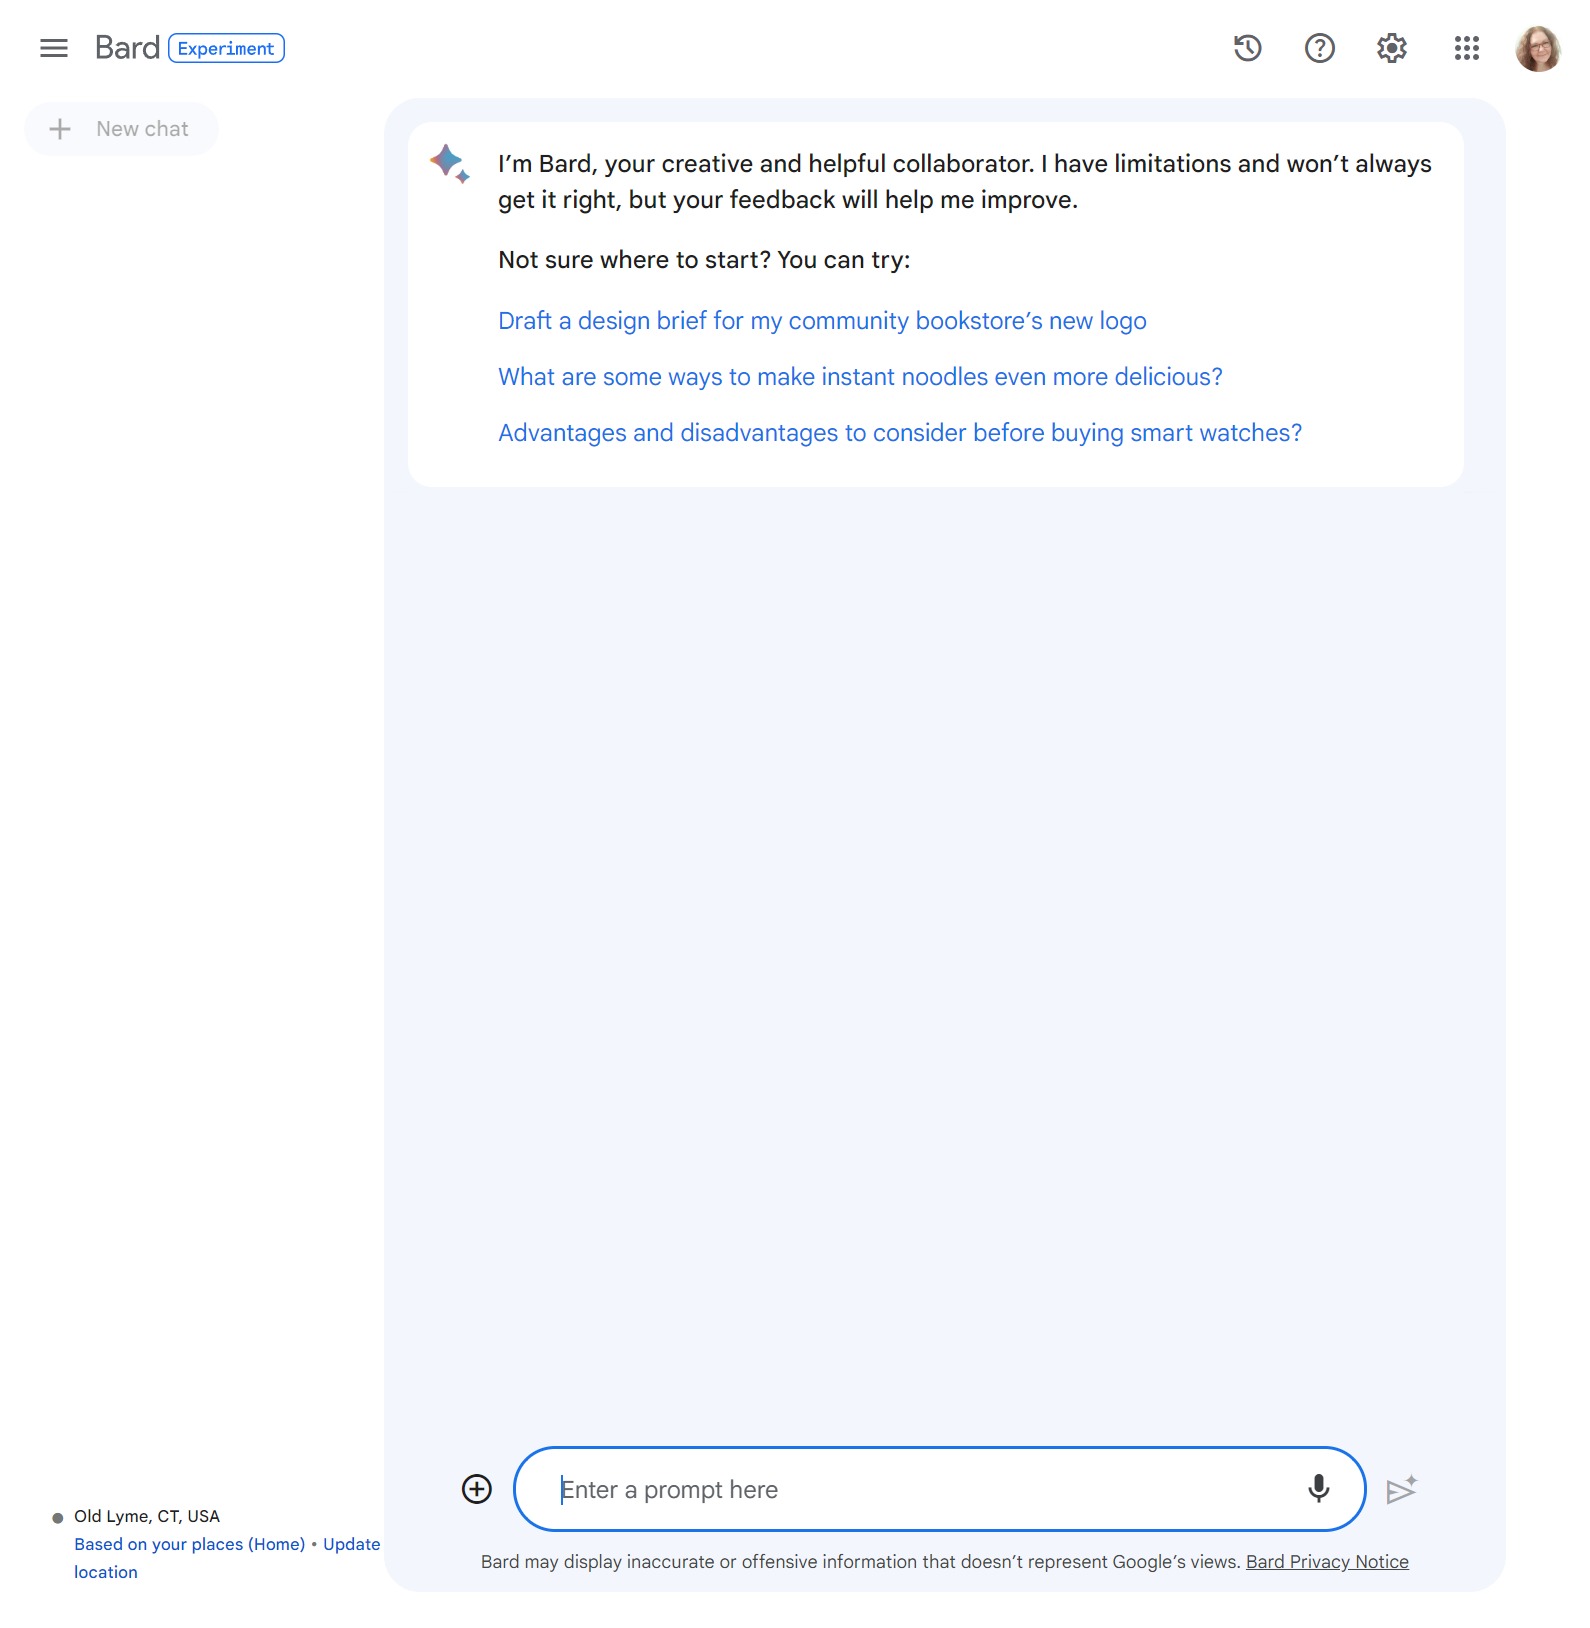 Screenshot of the interface for Google's new AI chatbot, Bard. Like similar AI writing tools it features a text input box at the bottom for users to enter questions or prompts. In the main message area where input prompts and output messages will appear is an introductory message from Google with some suggested topics to ask if you aren't sure what you want to ask Bard. To the left is a column where your Bard conversations will appear if your account is set to save them.